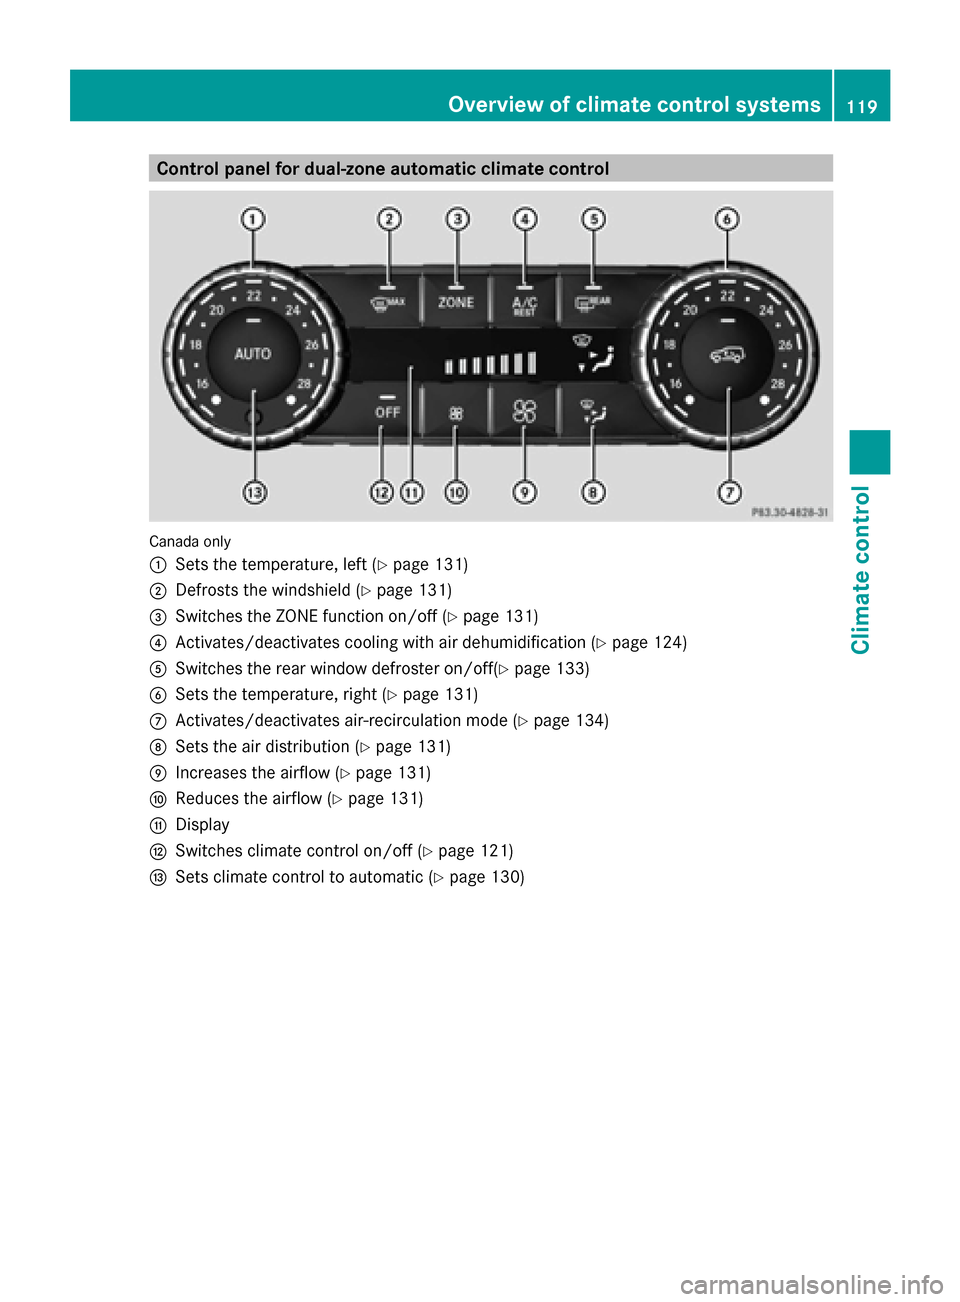 MERCEDES-BENZ G-Class 2014 W463 Owners Manual Control panel for dual-zone automatic climate control
Canada only
0043
Sets the temperature, left (Y page 131)
0044 Defrosts the windshield (Y page 131)
0087 Switches the ZONE function on/off (Y page 